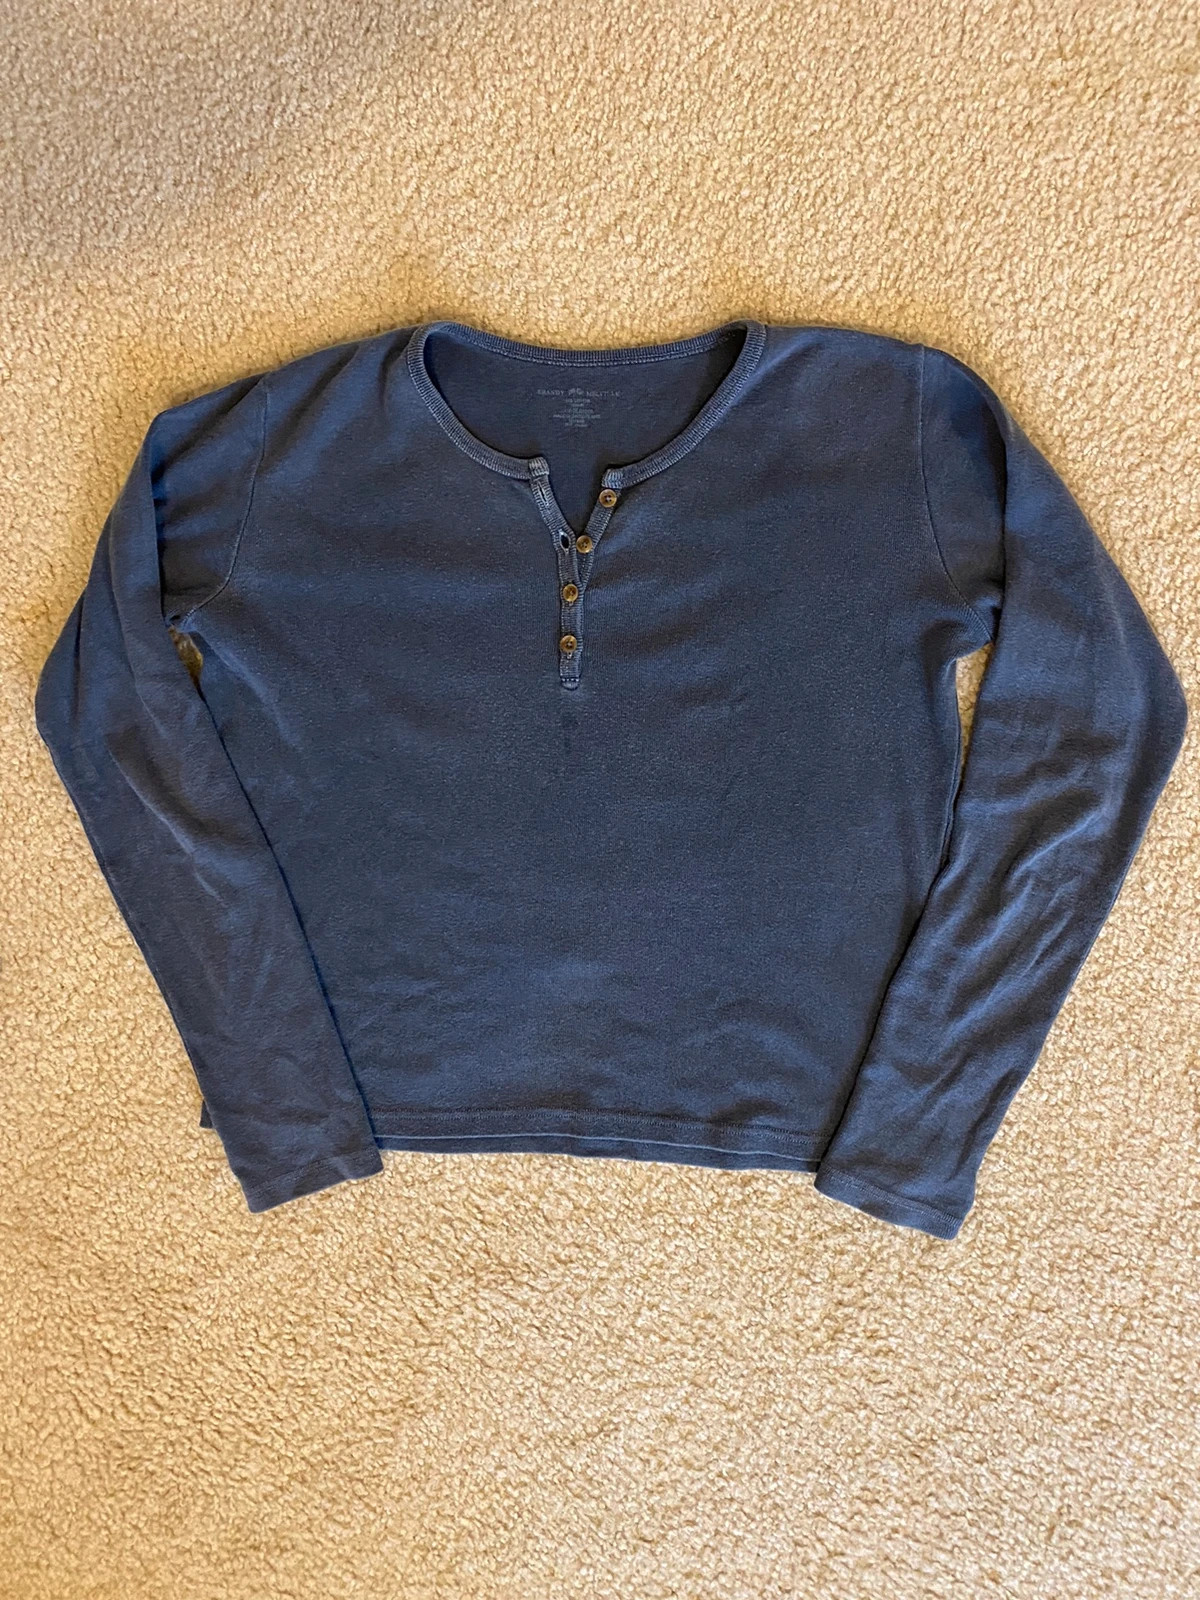 Brandy Melville Long Sleeve Blue - $14 (53% Off Retail) - From Charlotte